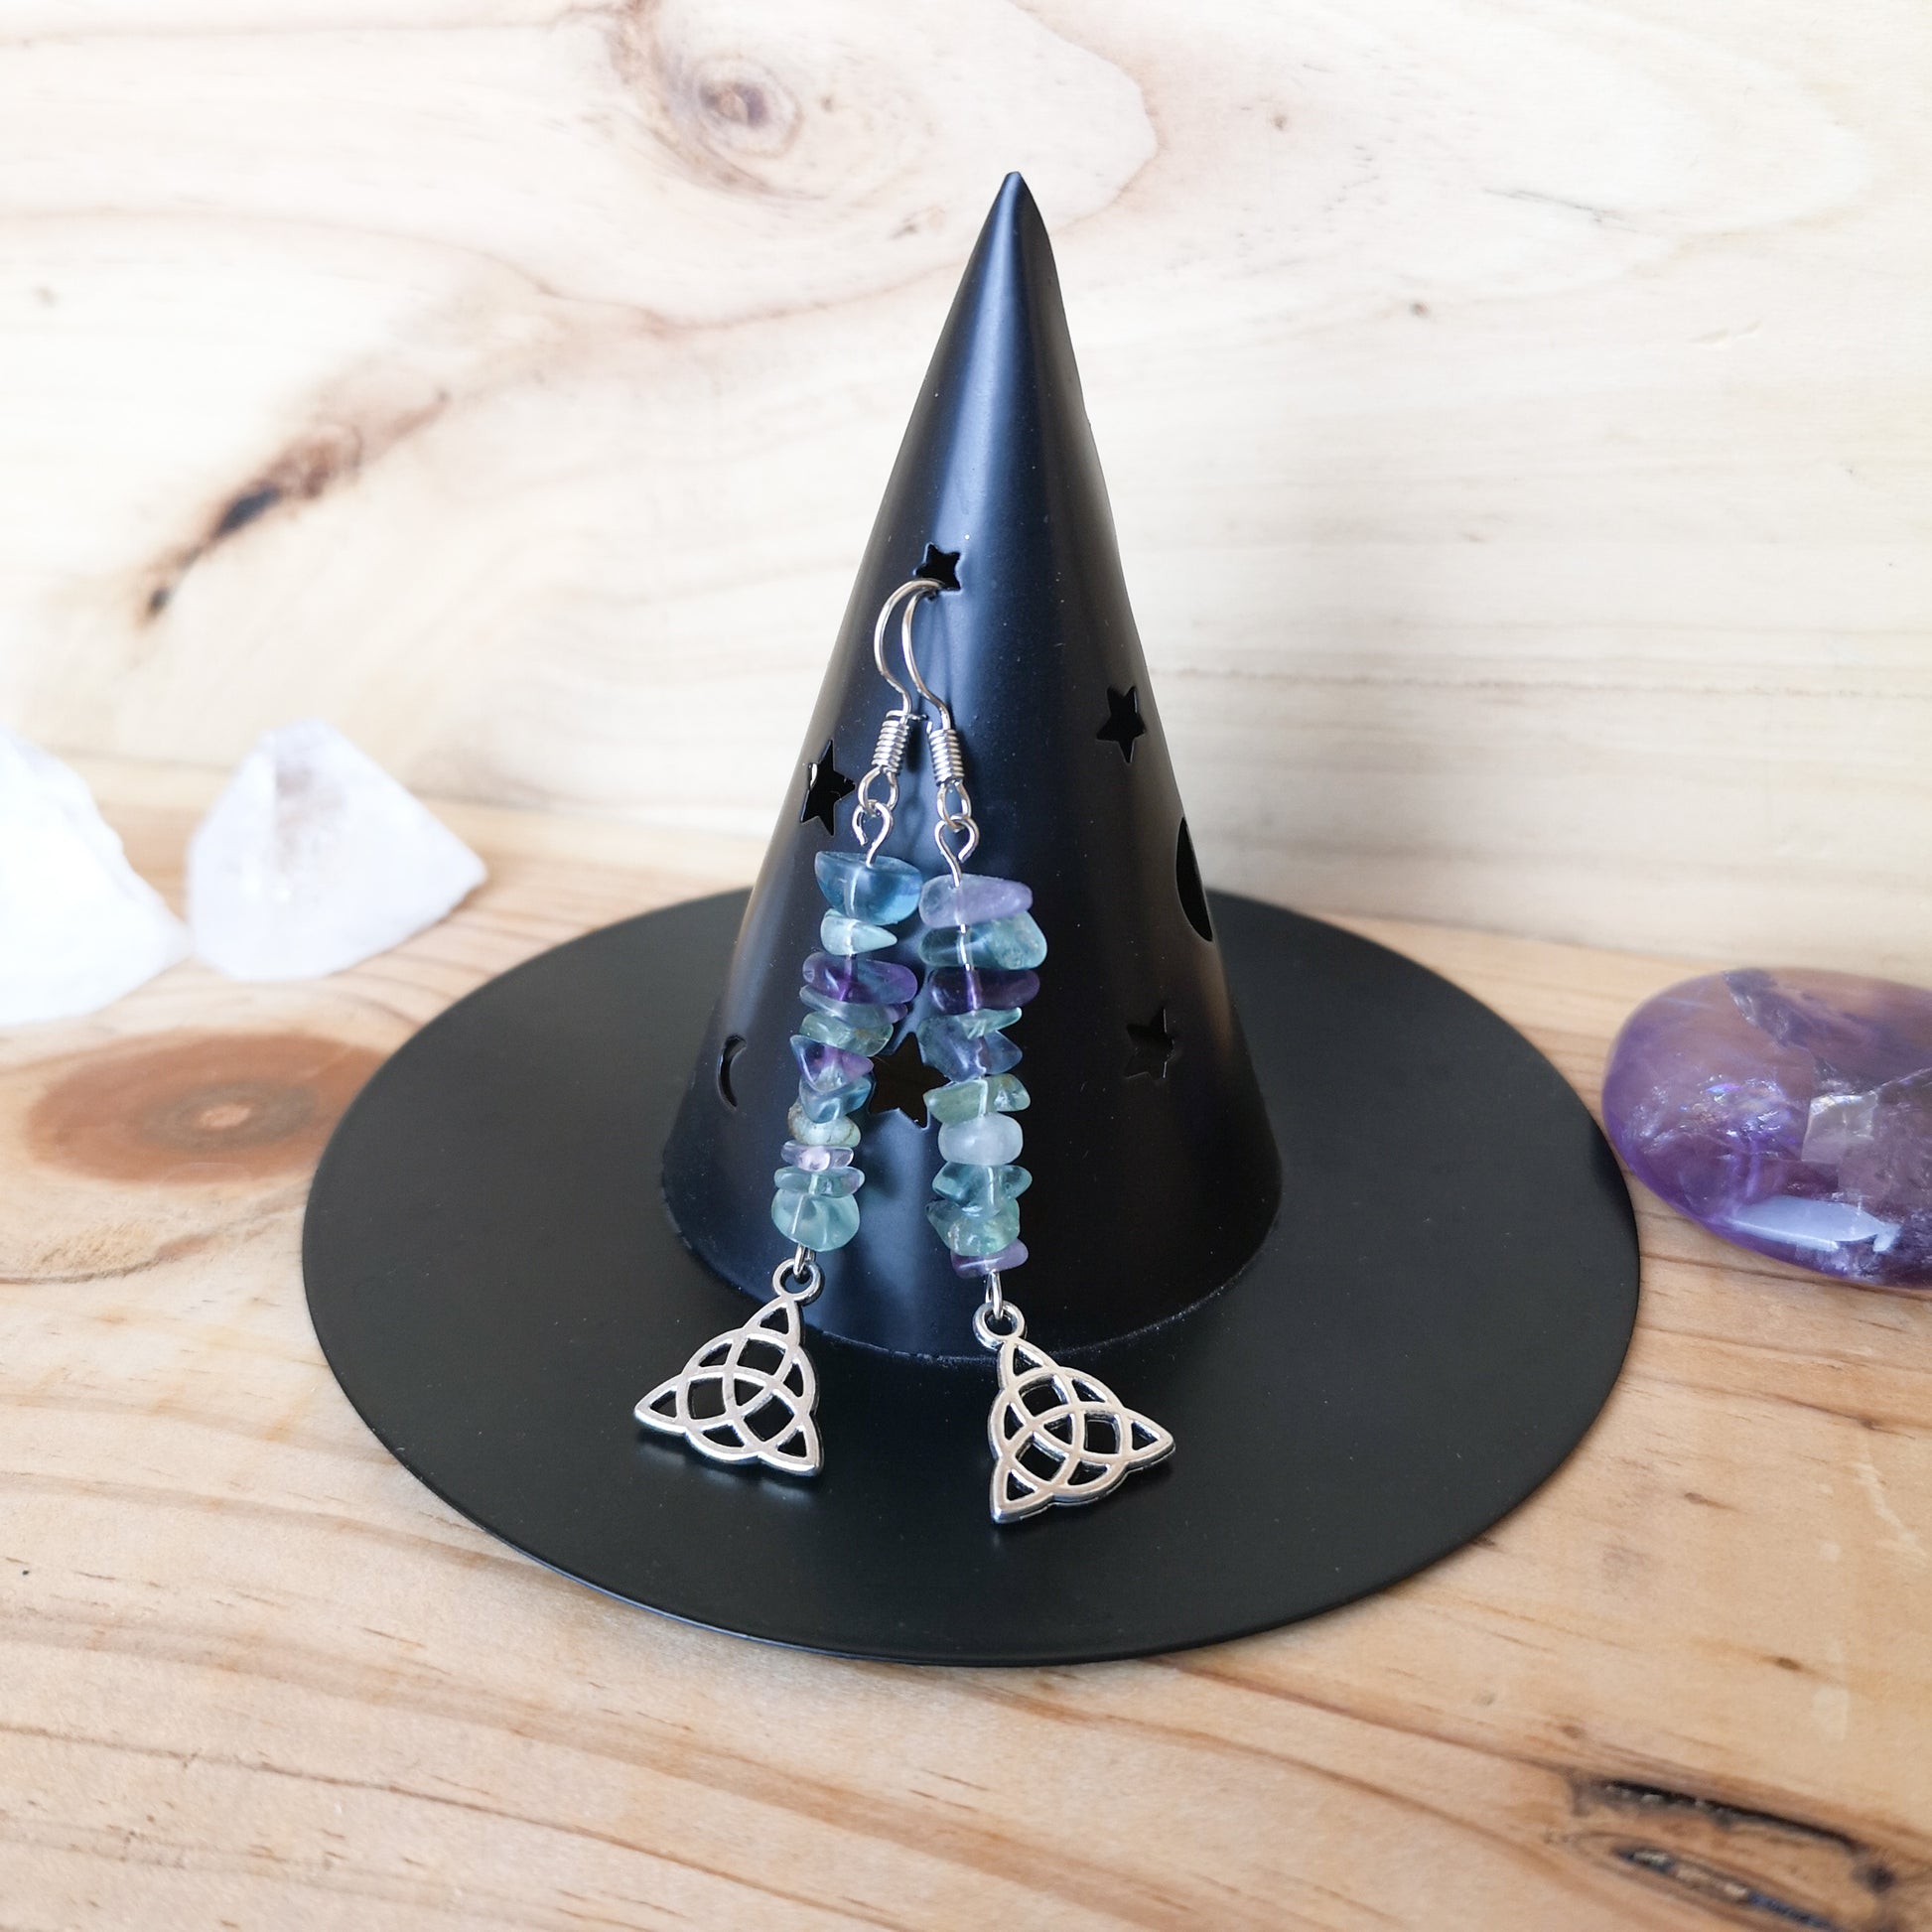 Triquetra and fluorite crystal Celtic earrings Baguette Magick